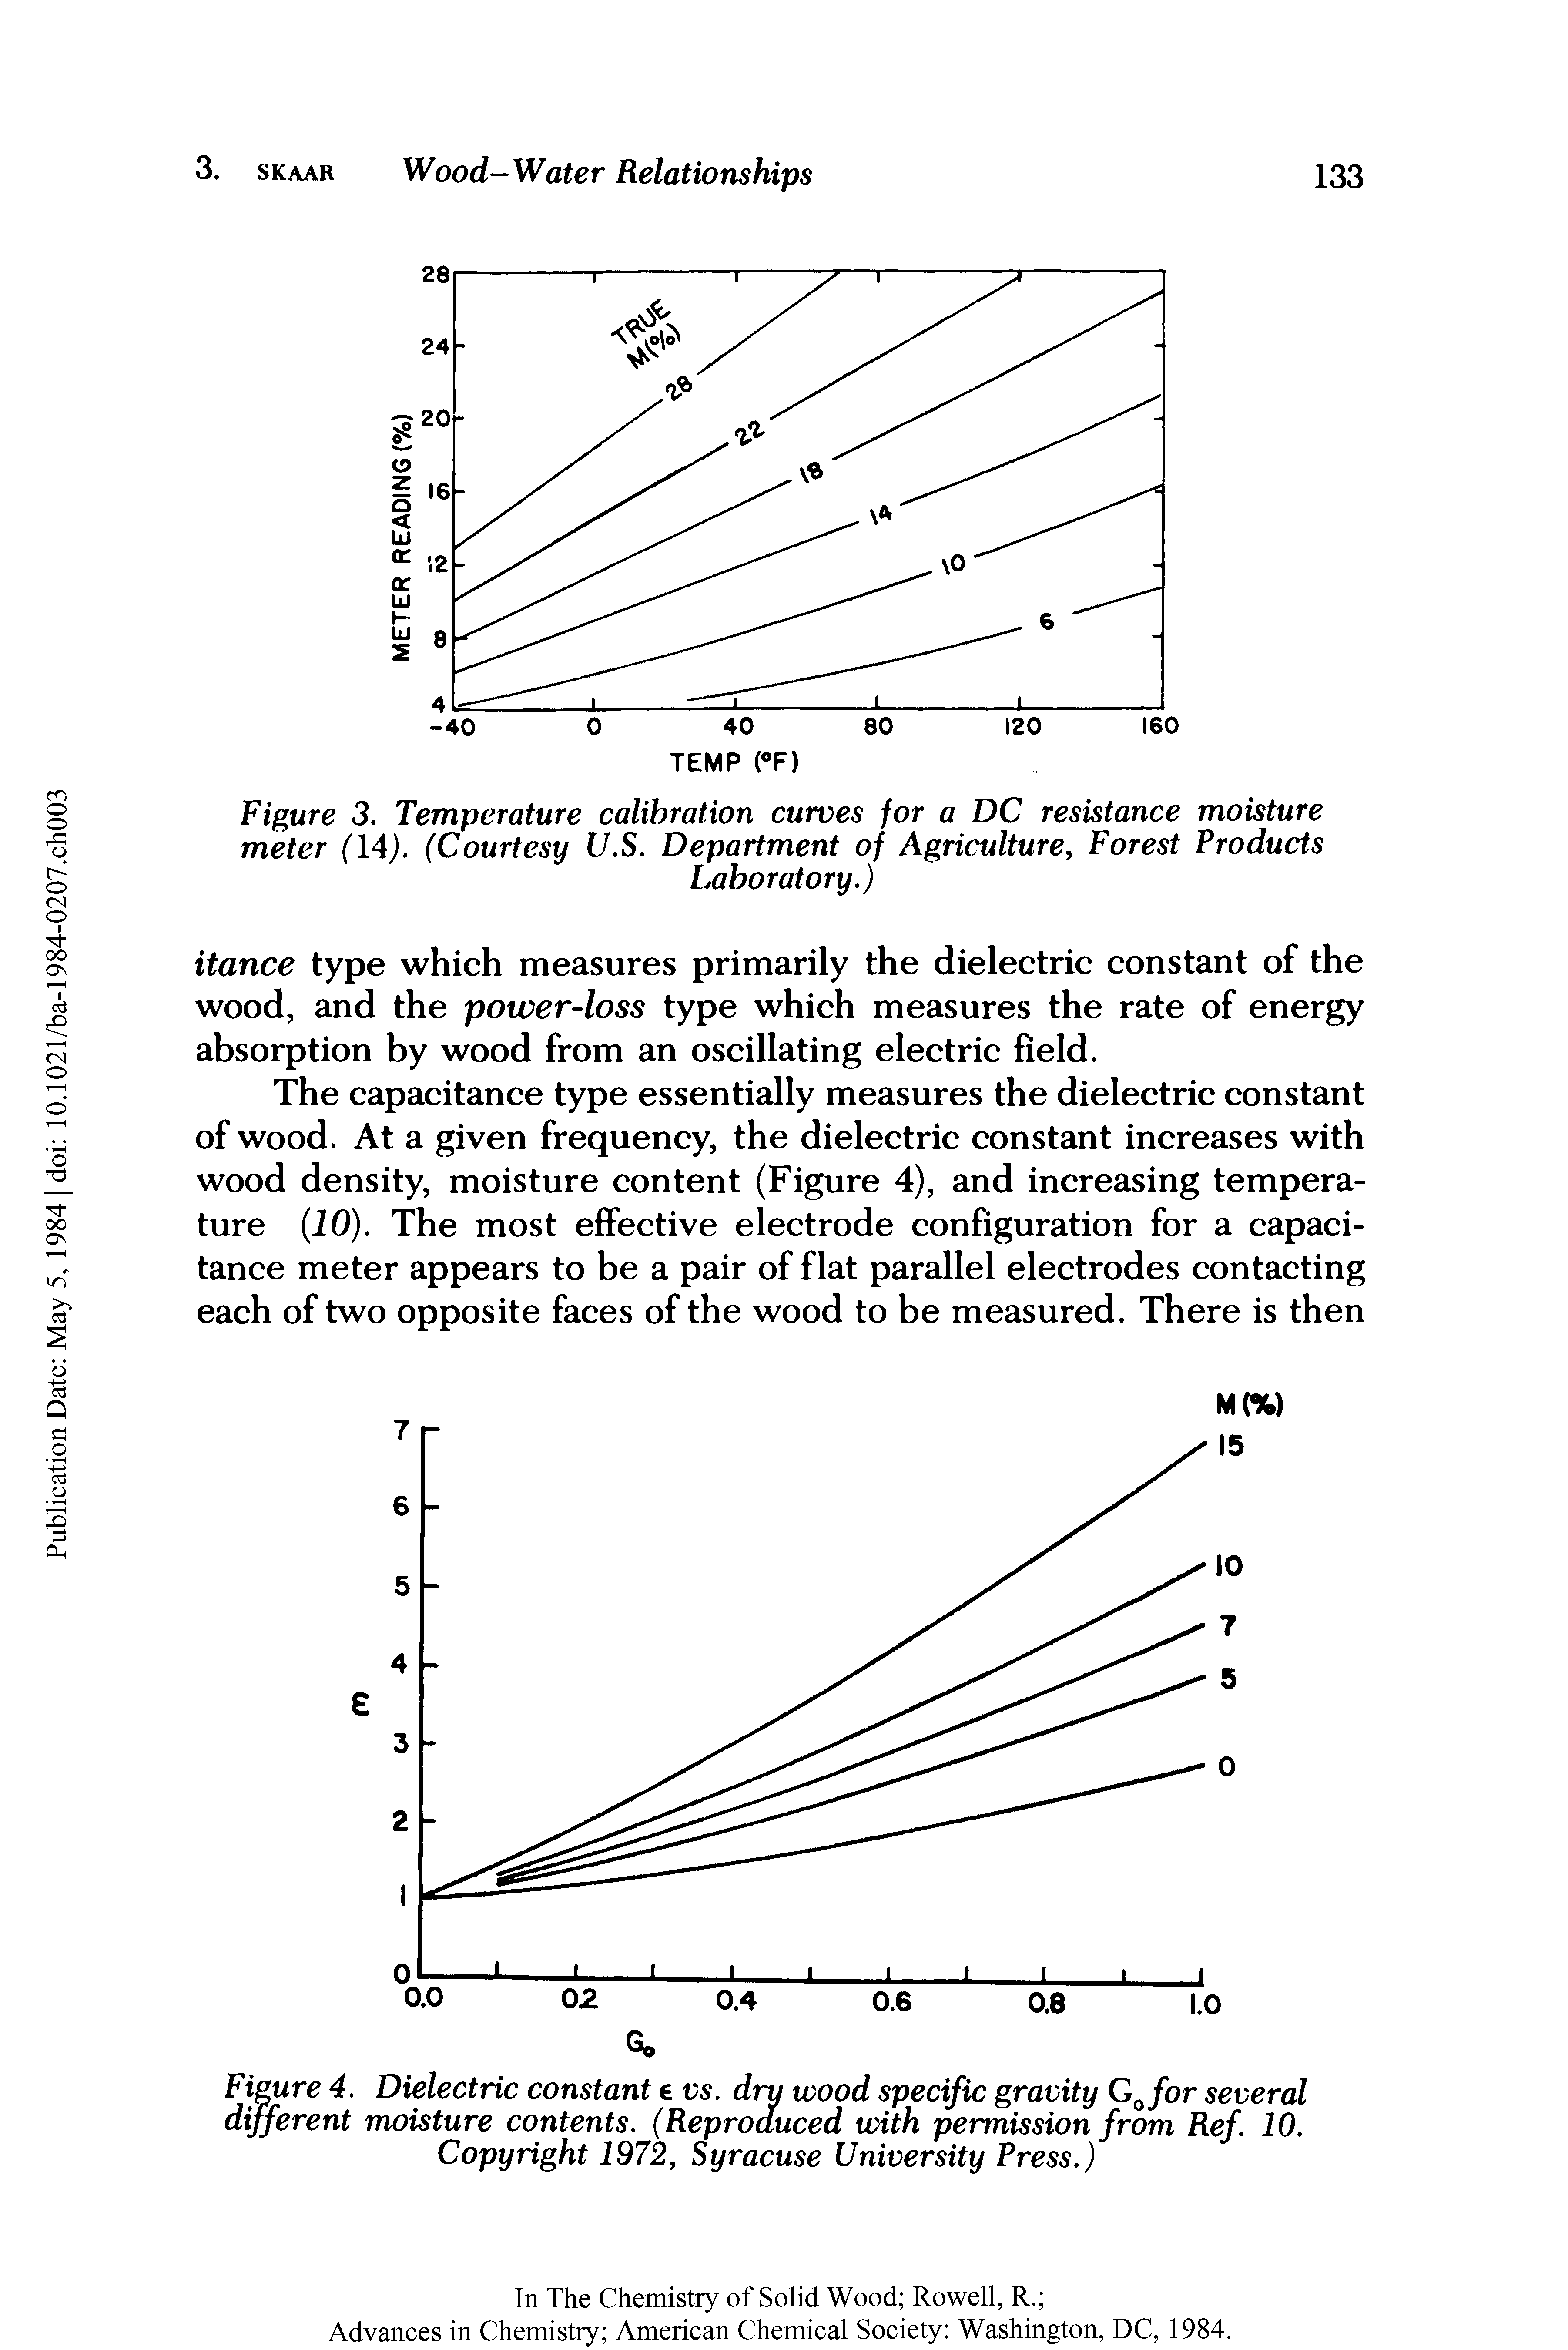 Figure 3. Temperature calibration curves for a DC resistance moisture meter (14). (Courtesy U.S. Department of Agriculture, Forest Products...